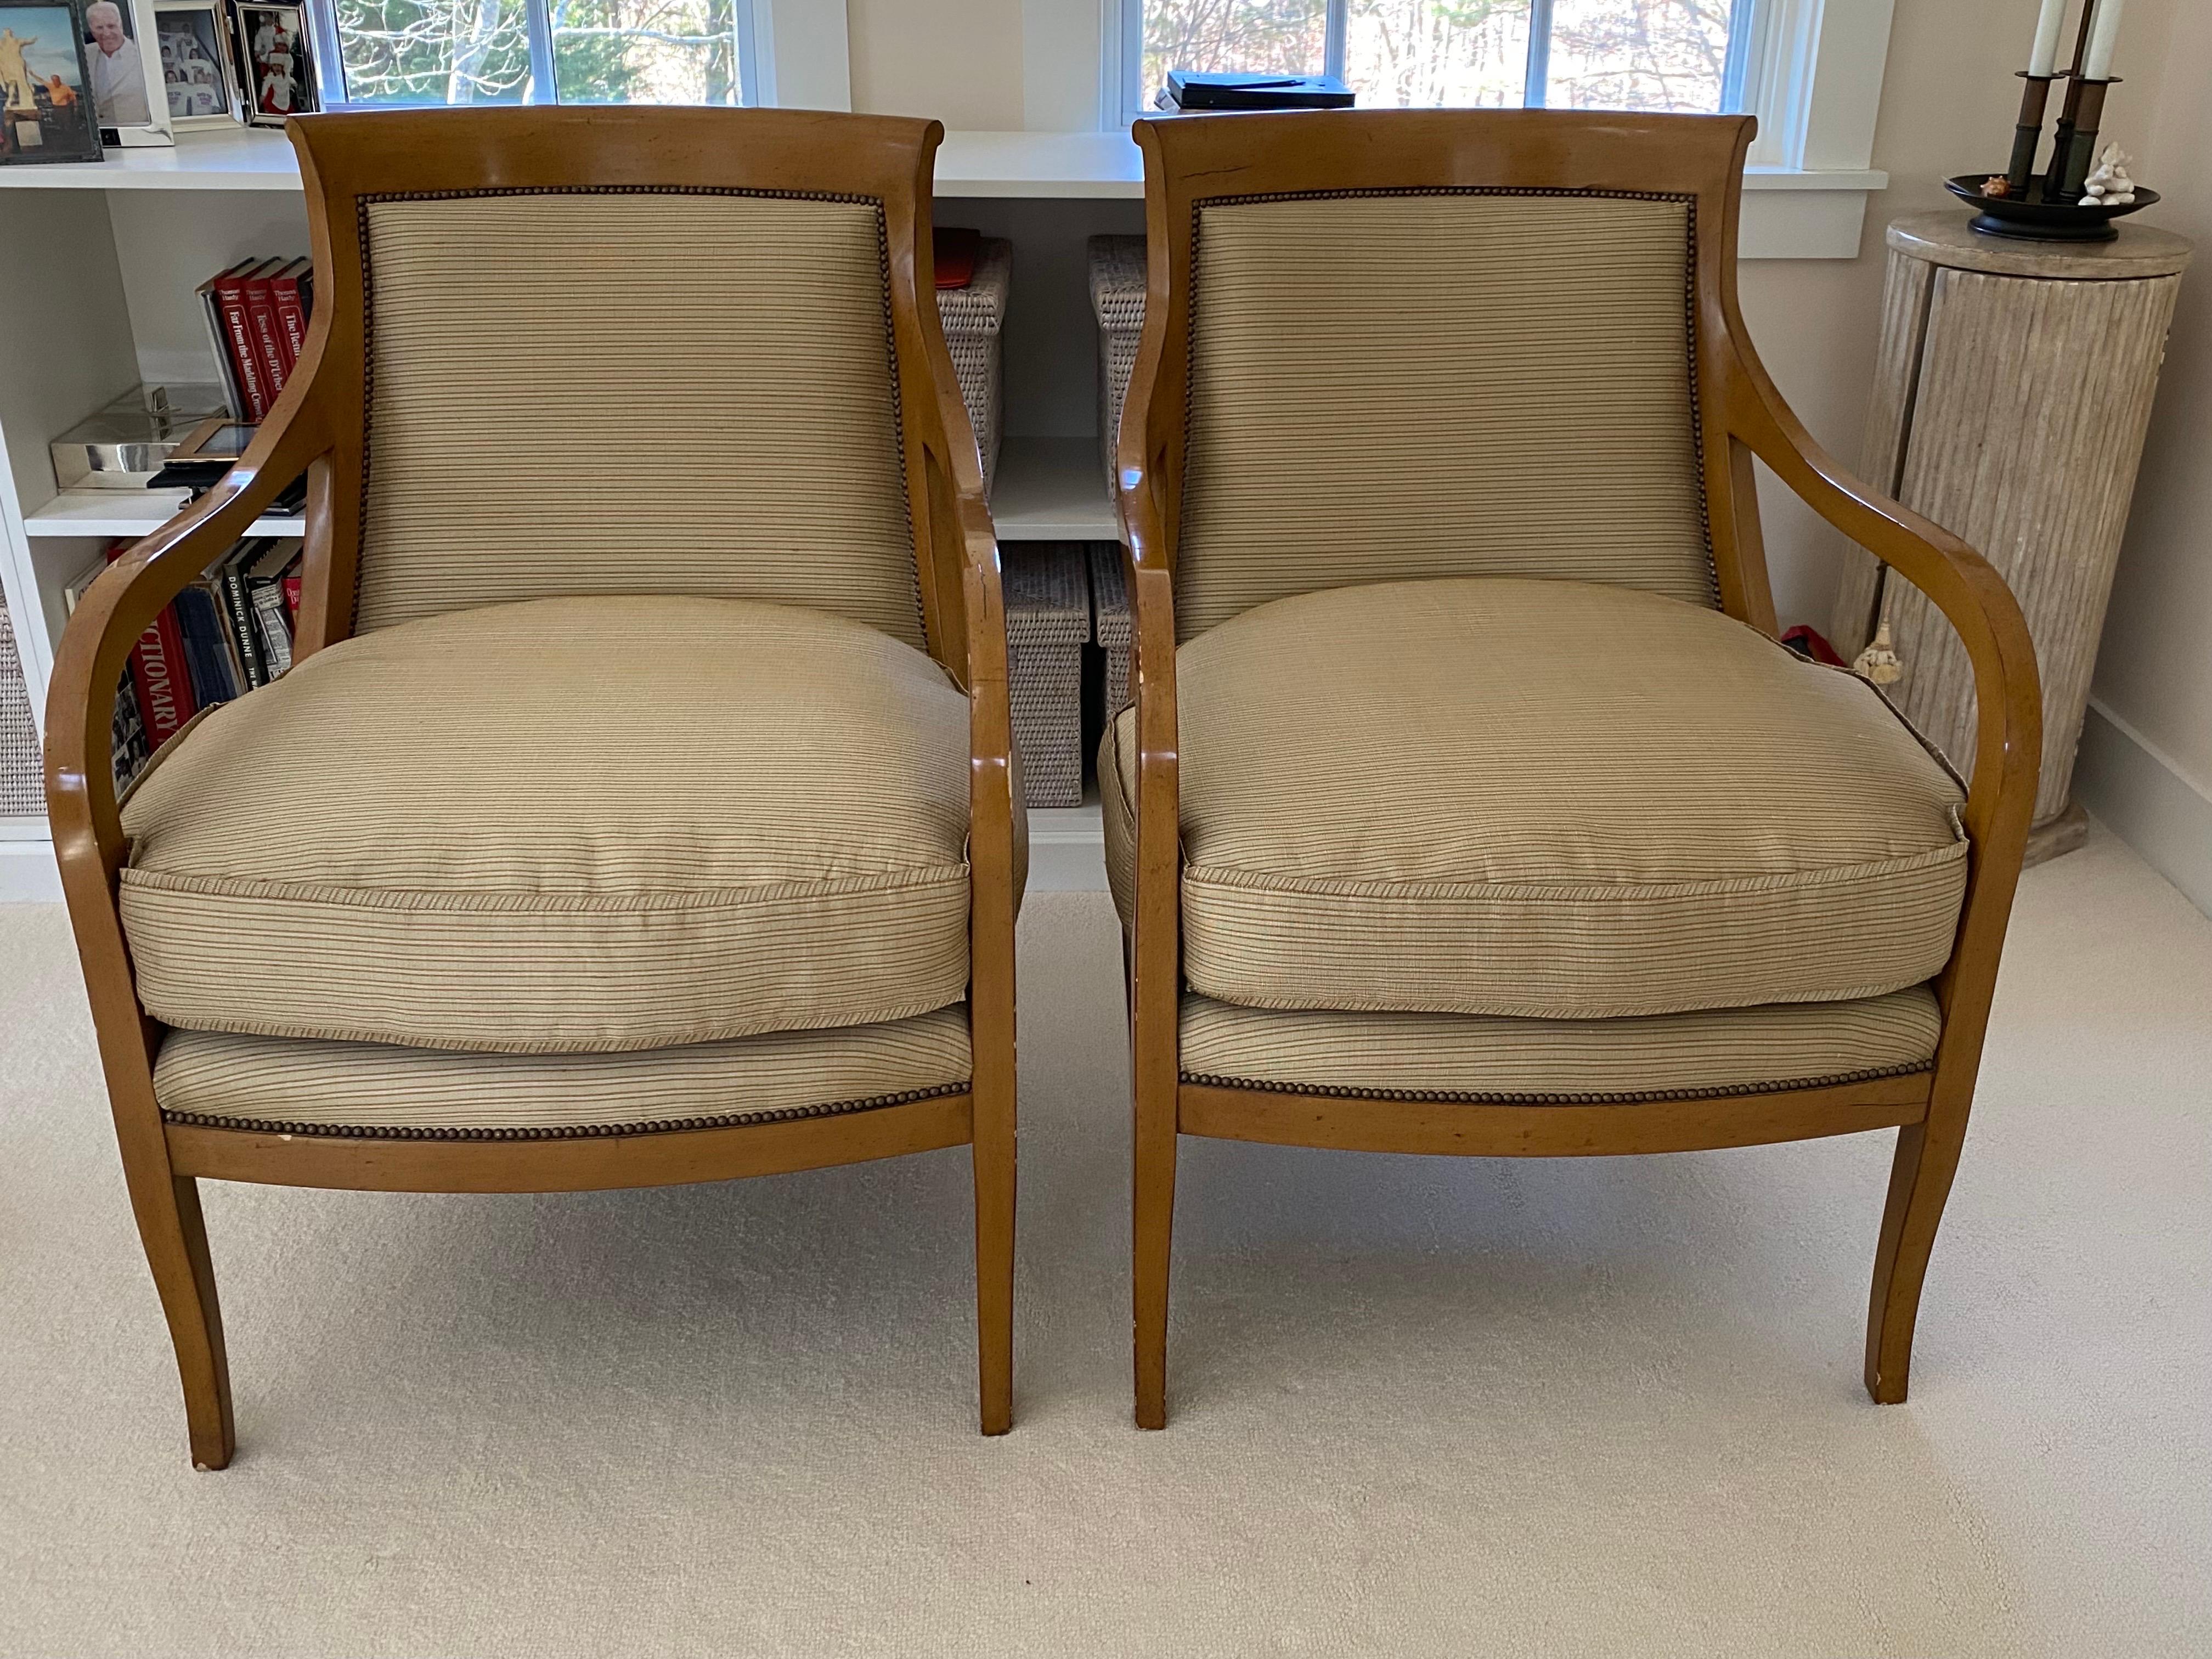 Pair of Nancy Corzine '2003 Napoleon Lounge' Chairs in Silk Fabric For Sale 8